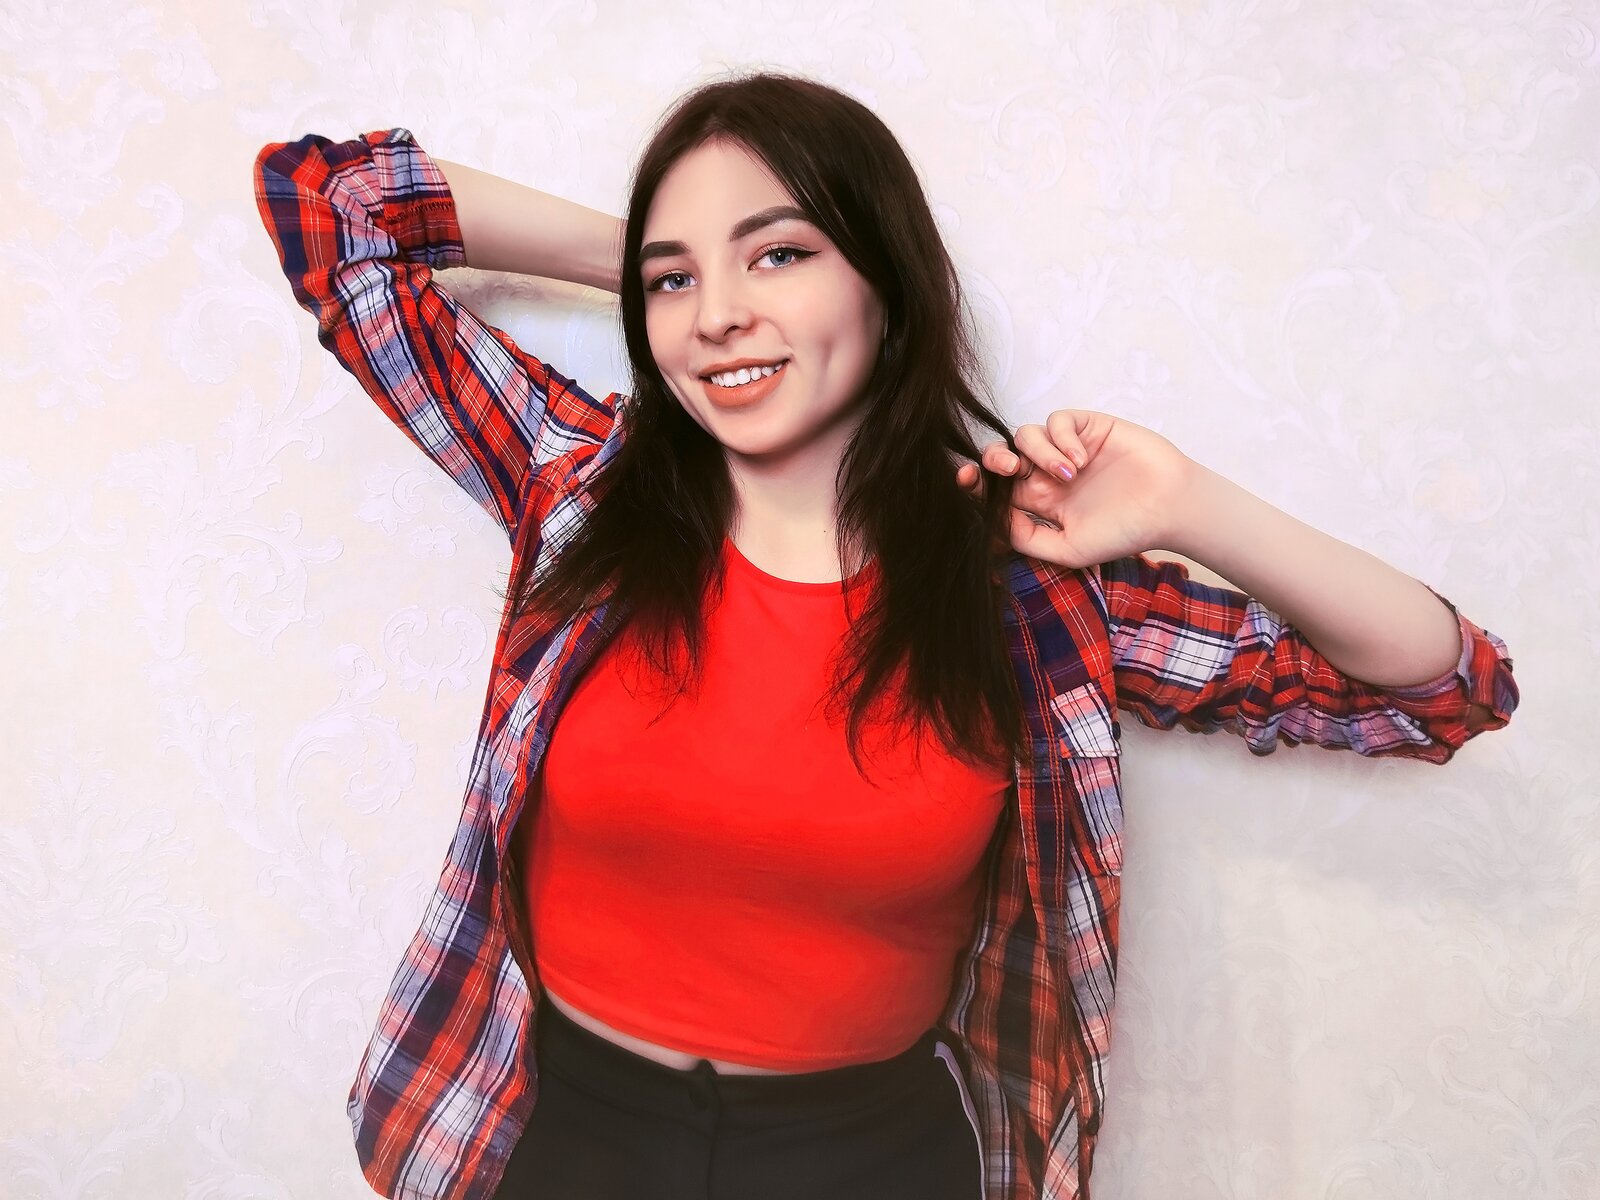 Free Live Sex Chat With VeronikaCoral